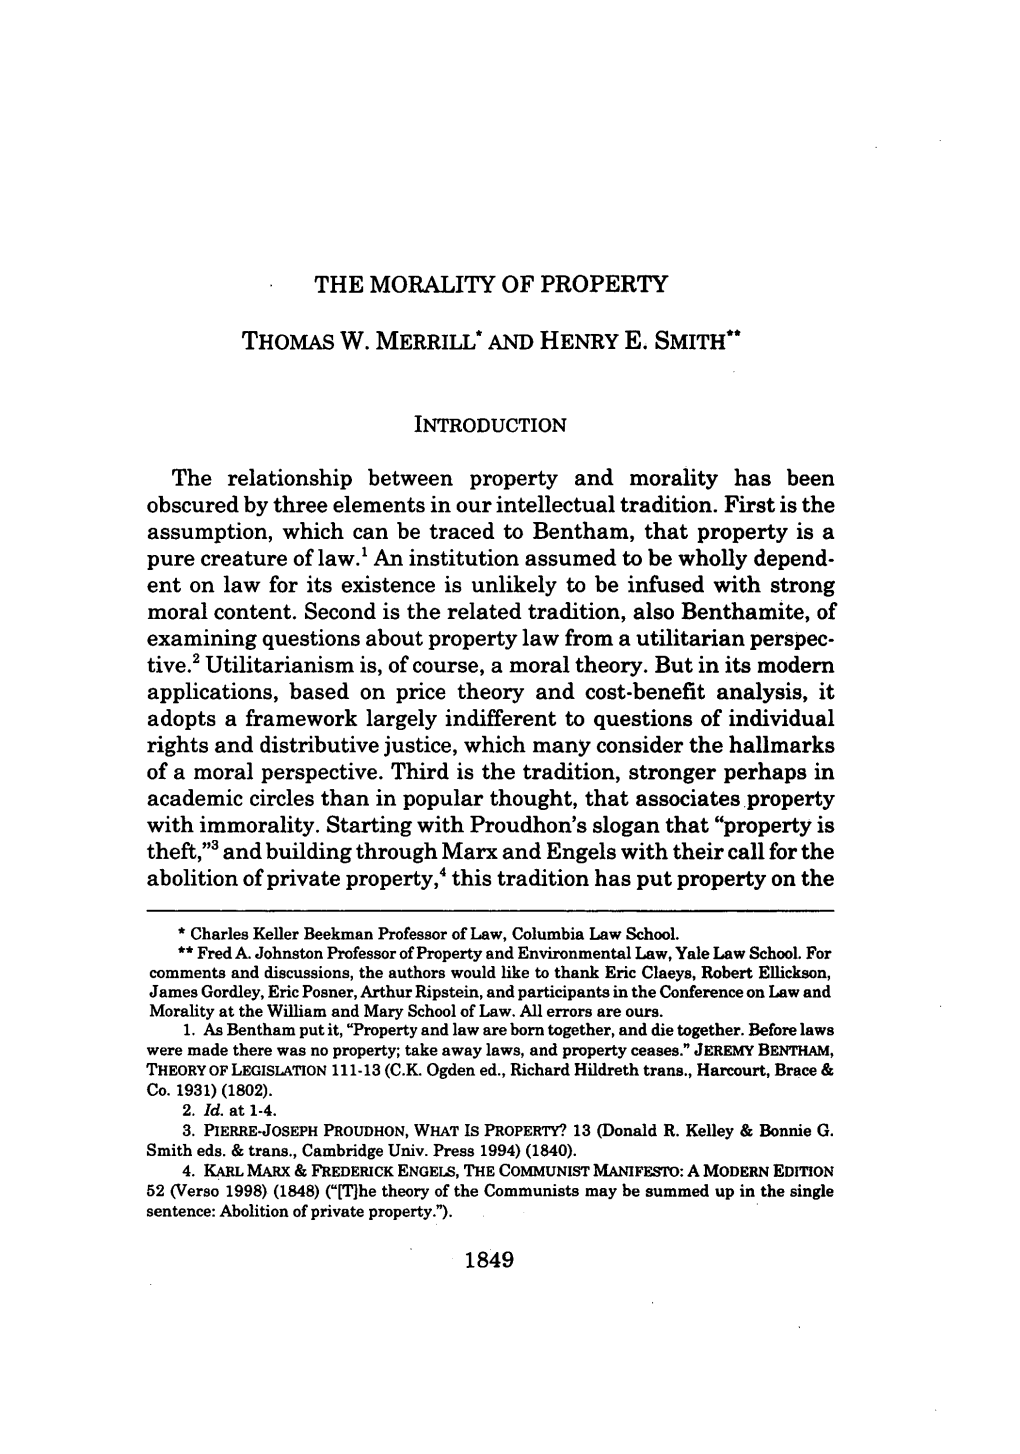 The Morality of Property